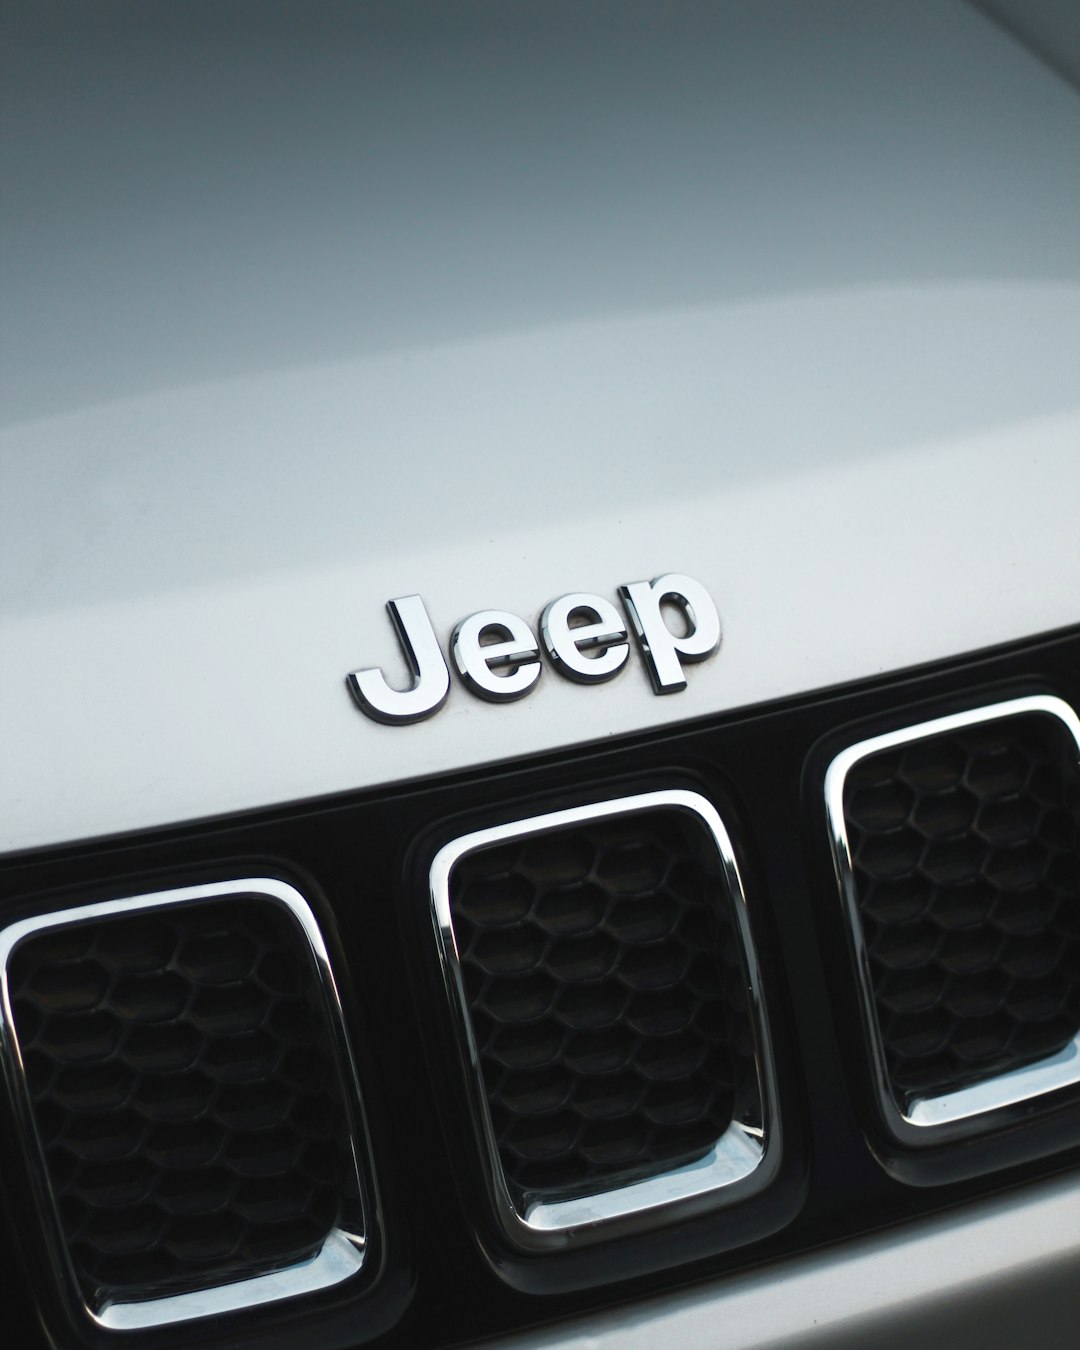 The Jeep Compass is a compact SUV known for its rugged capability and sleek design.